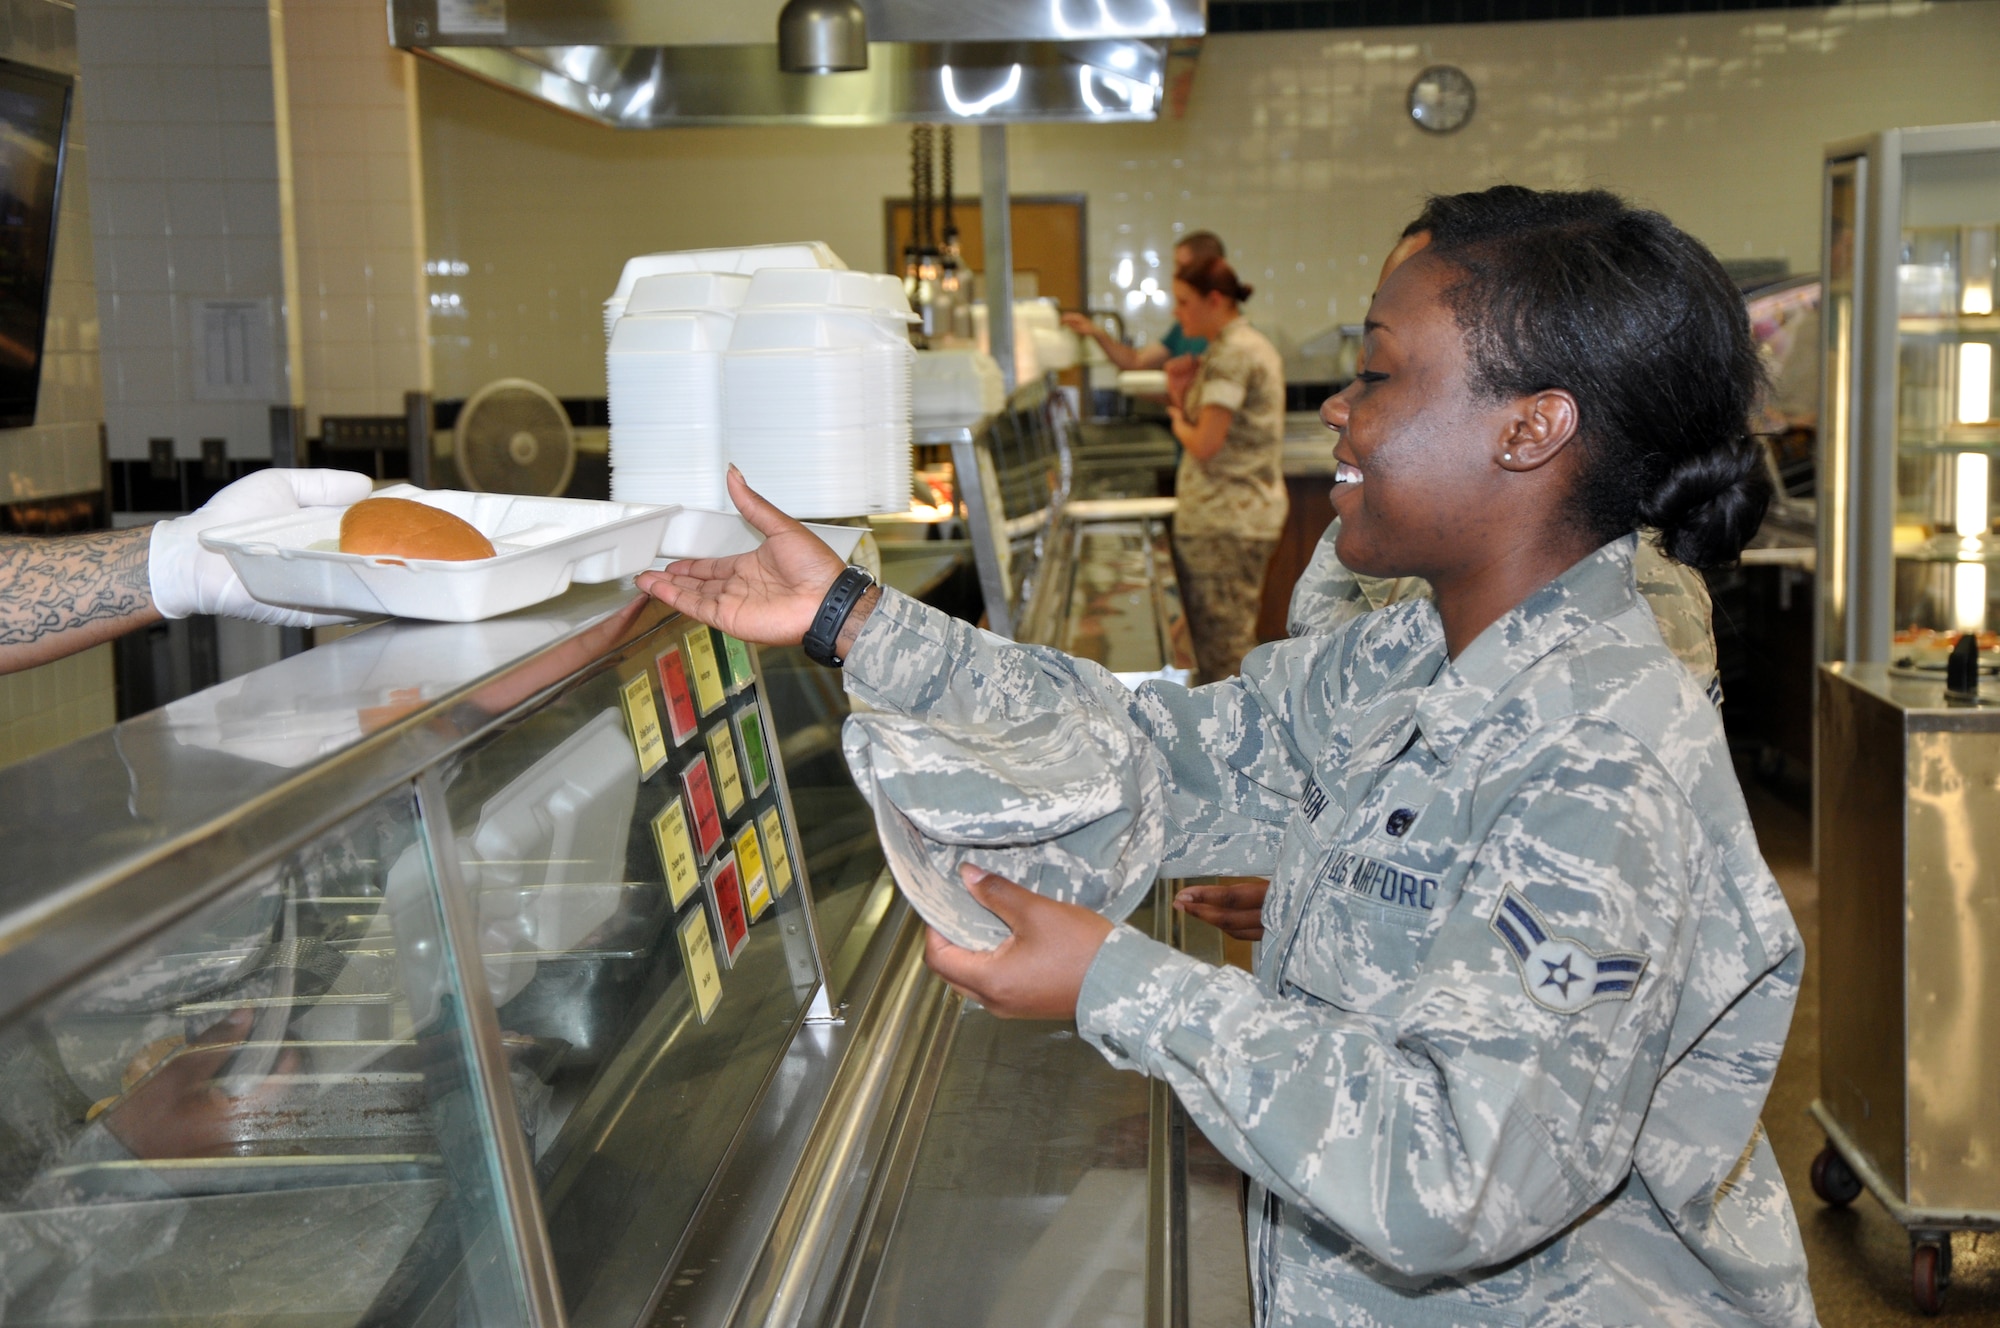 GOODFELLOW AIR FORCE BASE, Texas – Airman 1st Class Jebree M. Hinton, 17th Training Wing Legal Office Military Justice paralegal, receives her grilled sandwich at the Cressman Dining Facility May 6. Hinton and some other permanent party personnel as well as students already have meals deducted from their pay, so they do not need to worry about paying at the checkout. (U.S. Air Force photo/ Senior Airman Joshua Edwards)